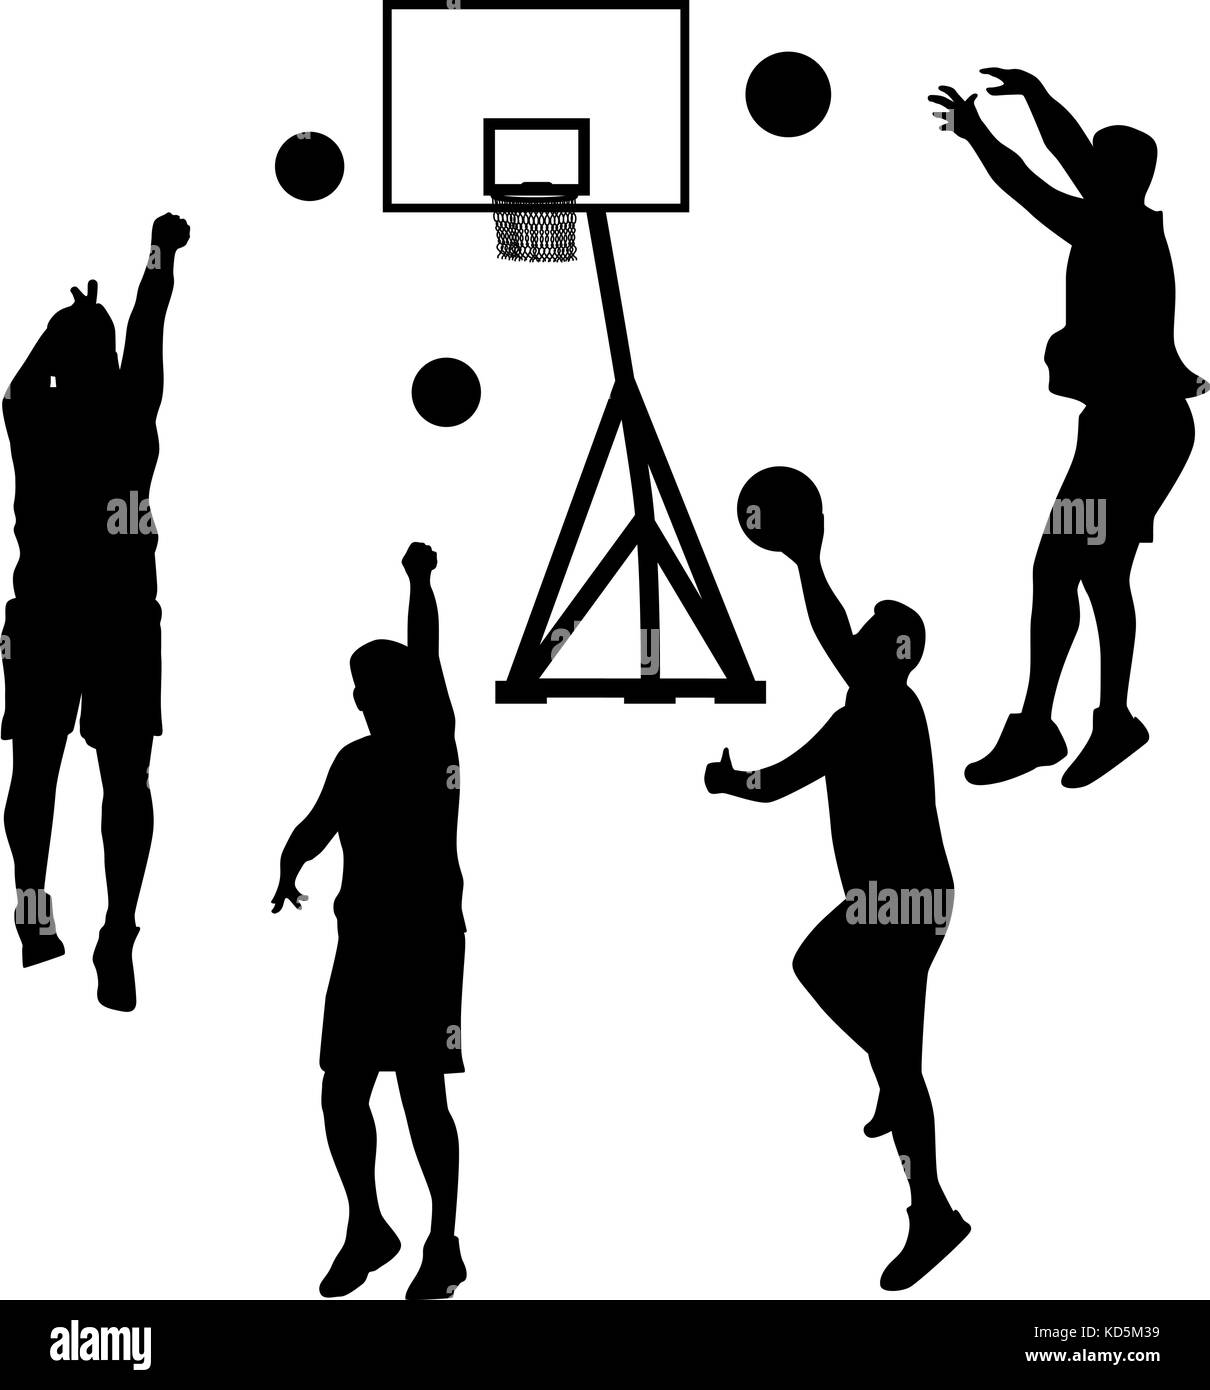 basketball player in different poses silhouette vector Stock Vector